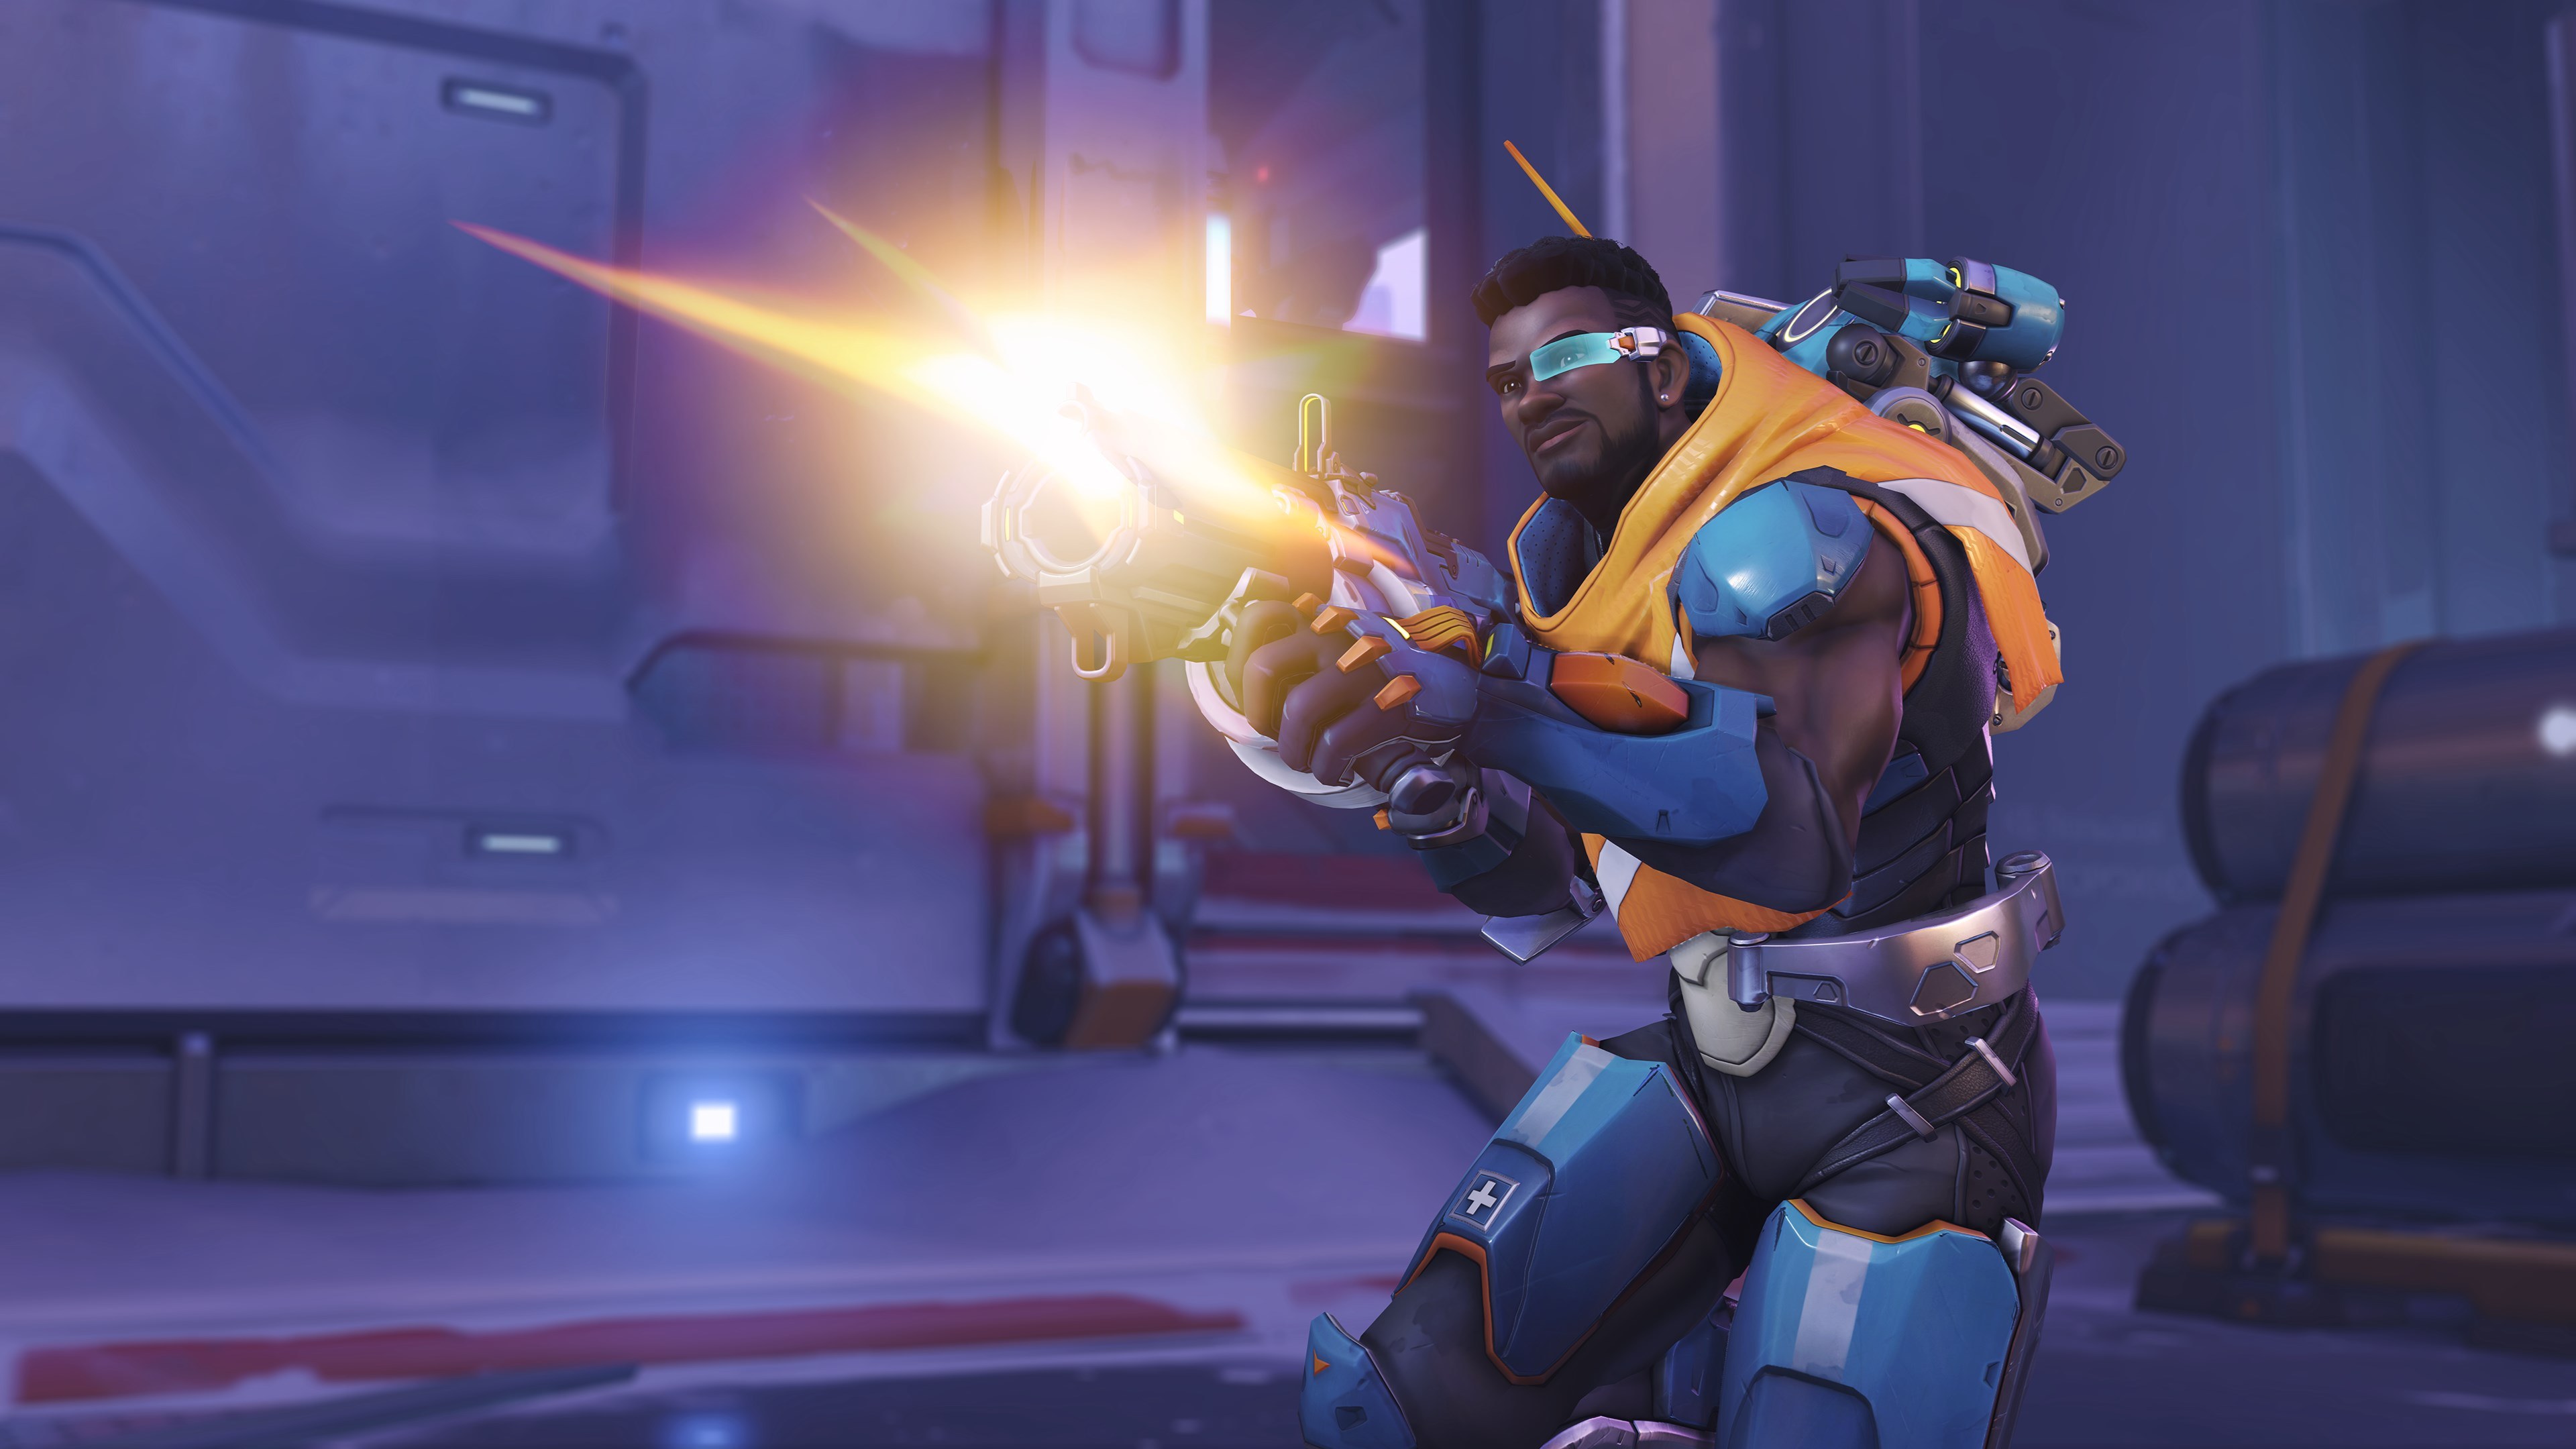 Baptiste Overwatch Video Game, HD Games